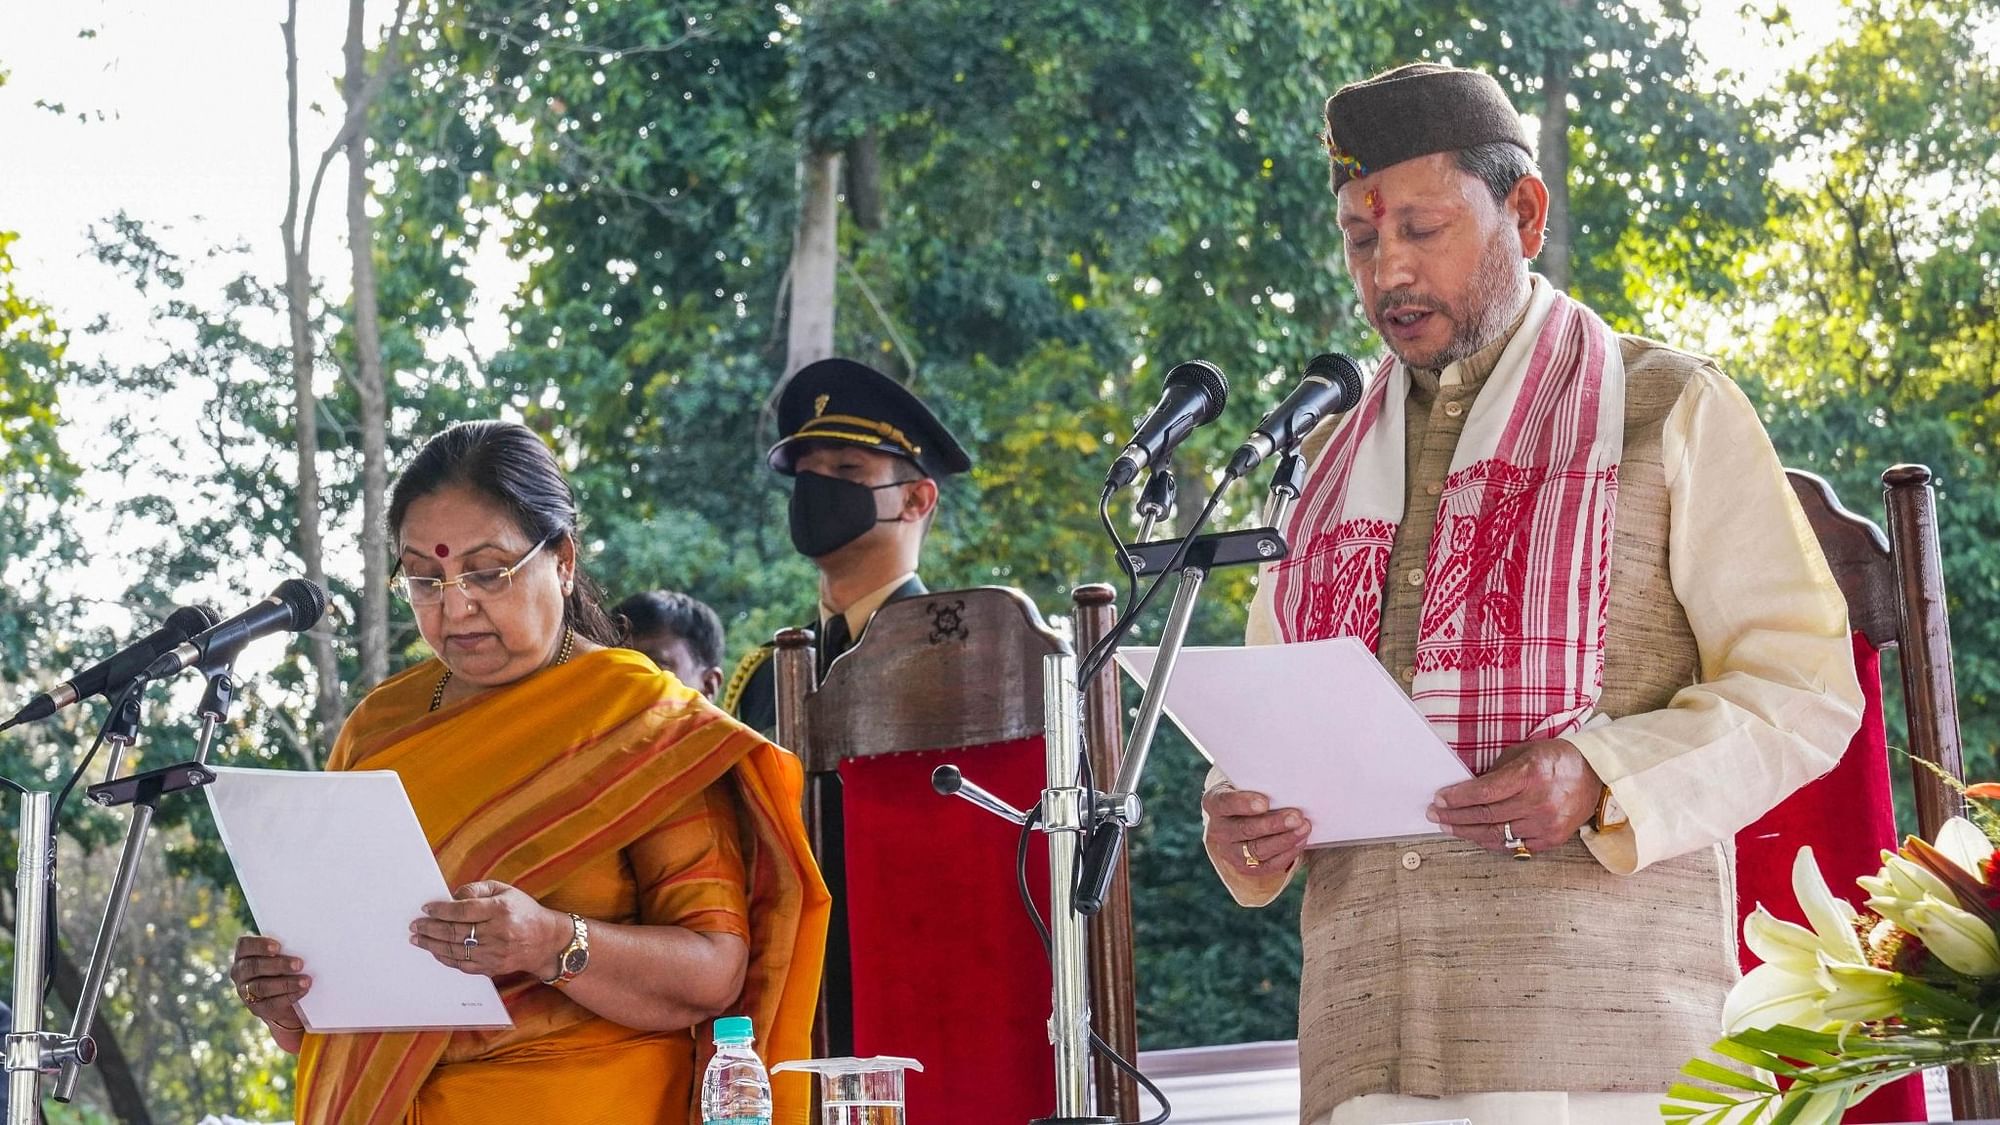 Uttarakhand Governor Baby Rani Maurya administers the oath to Tirath Singh Rawat as the new Chief Minister of Uttarakhand.